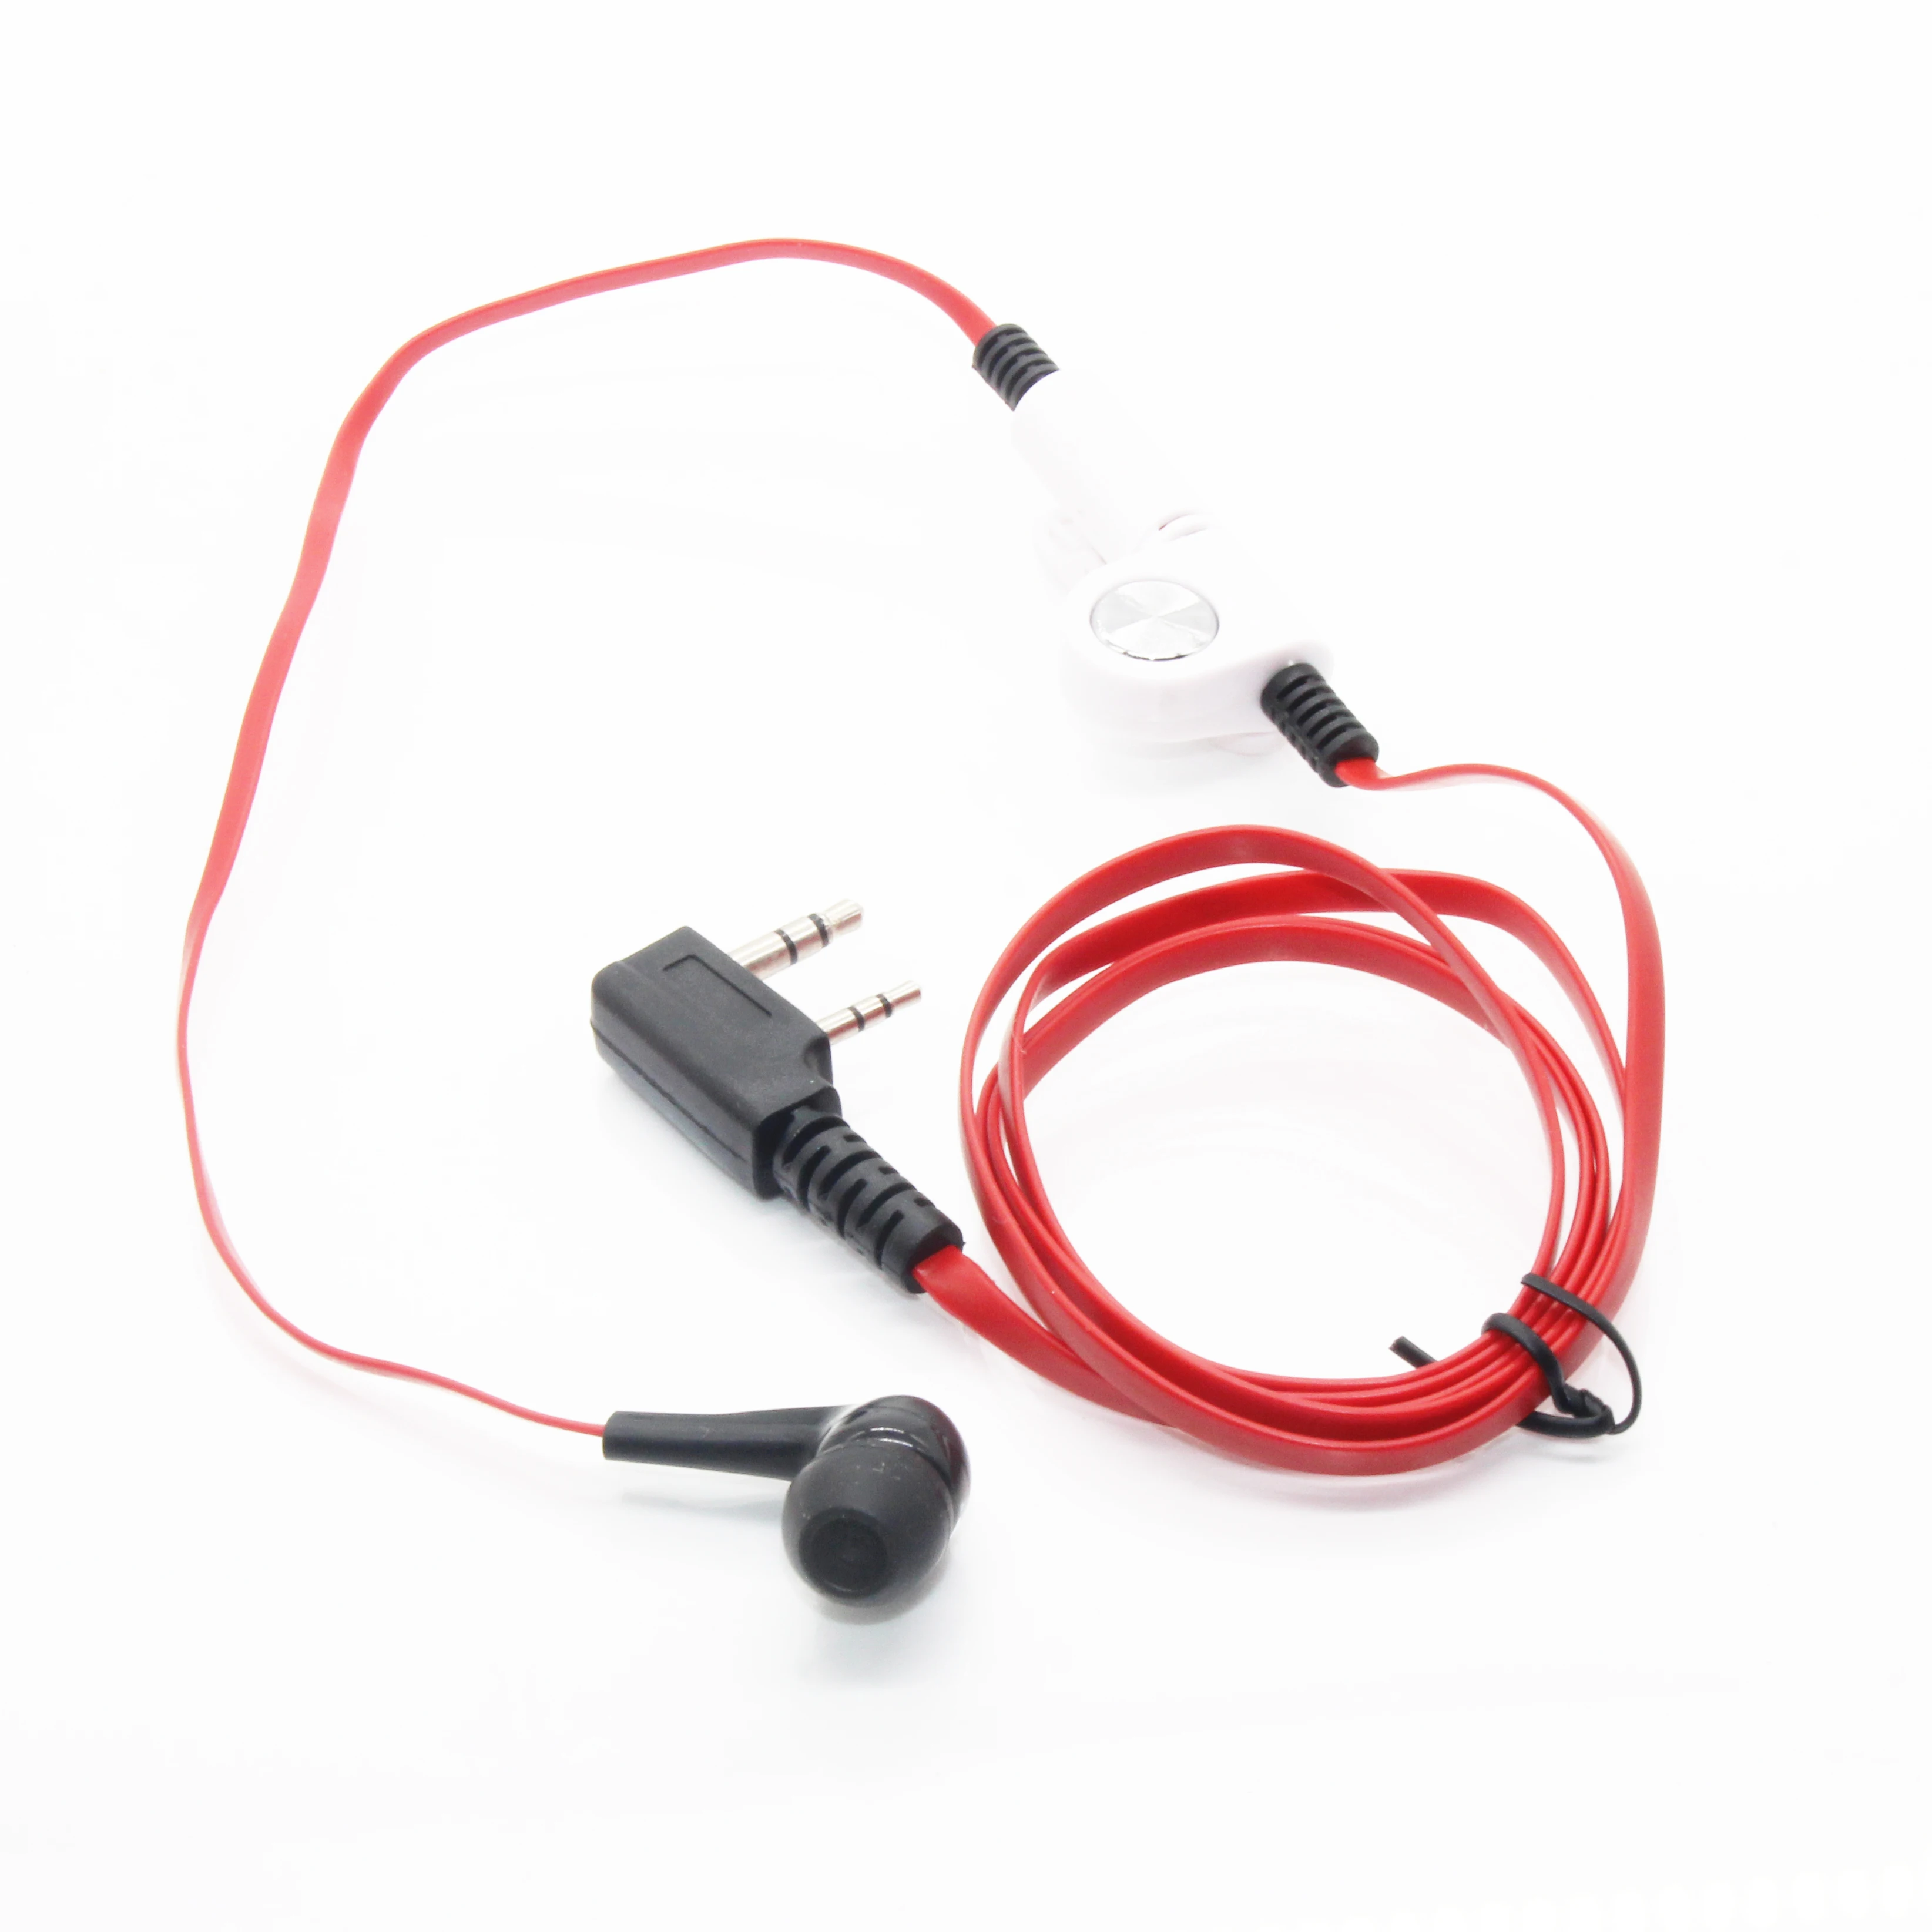 

2 Pin Noodle Style Earbud Headphone K Plug Earpiece Headset For Baofeng Uv5R Bf-888S Uv5R Radio Red Wire